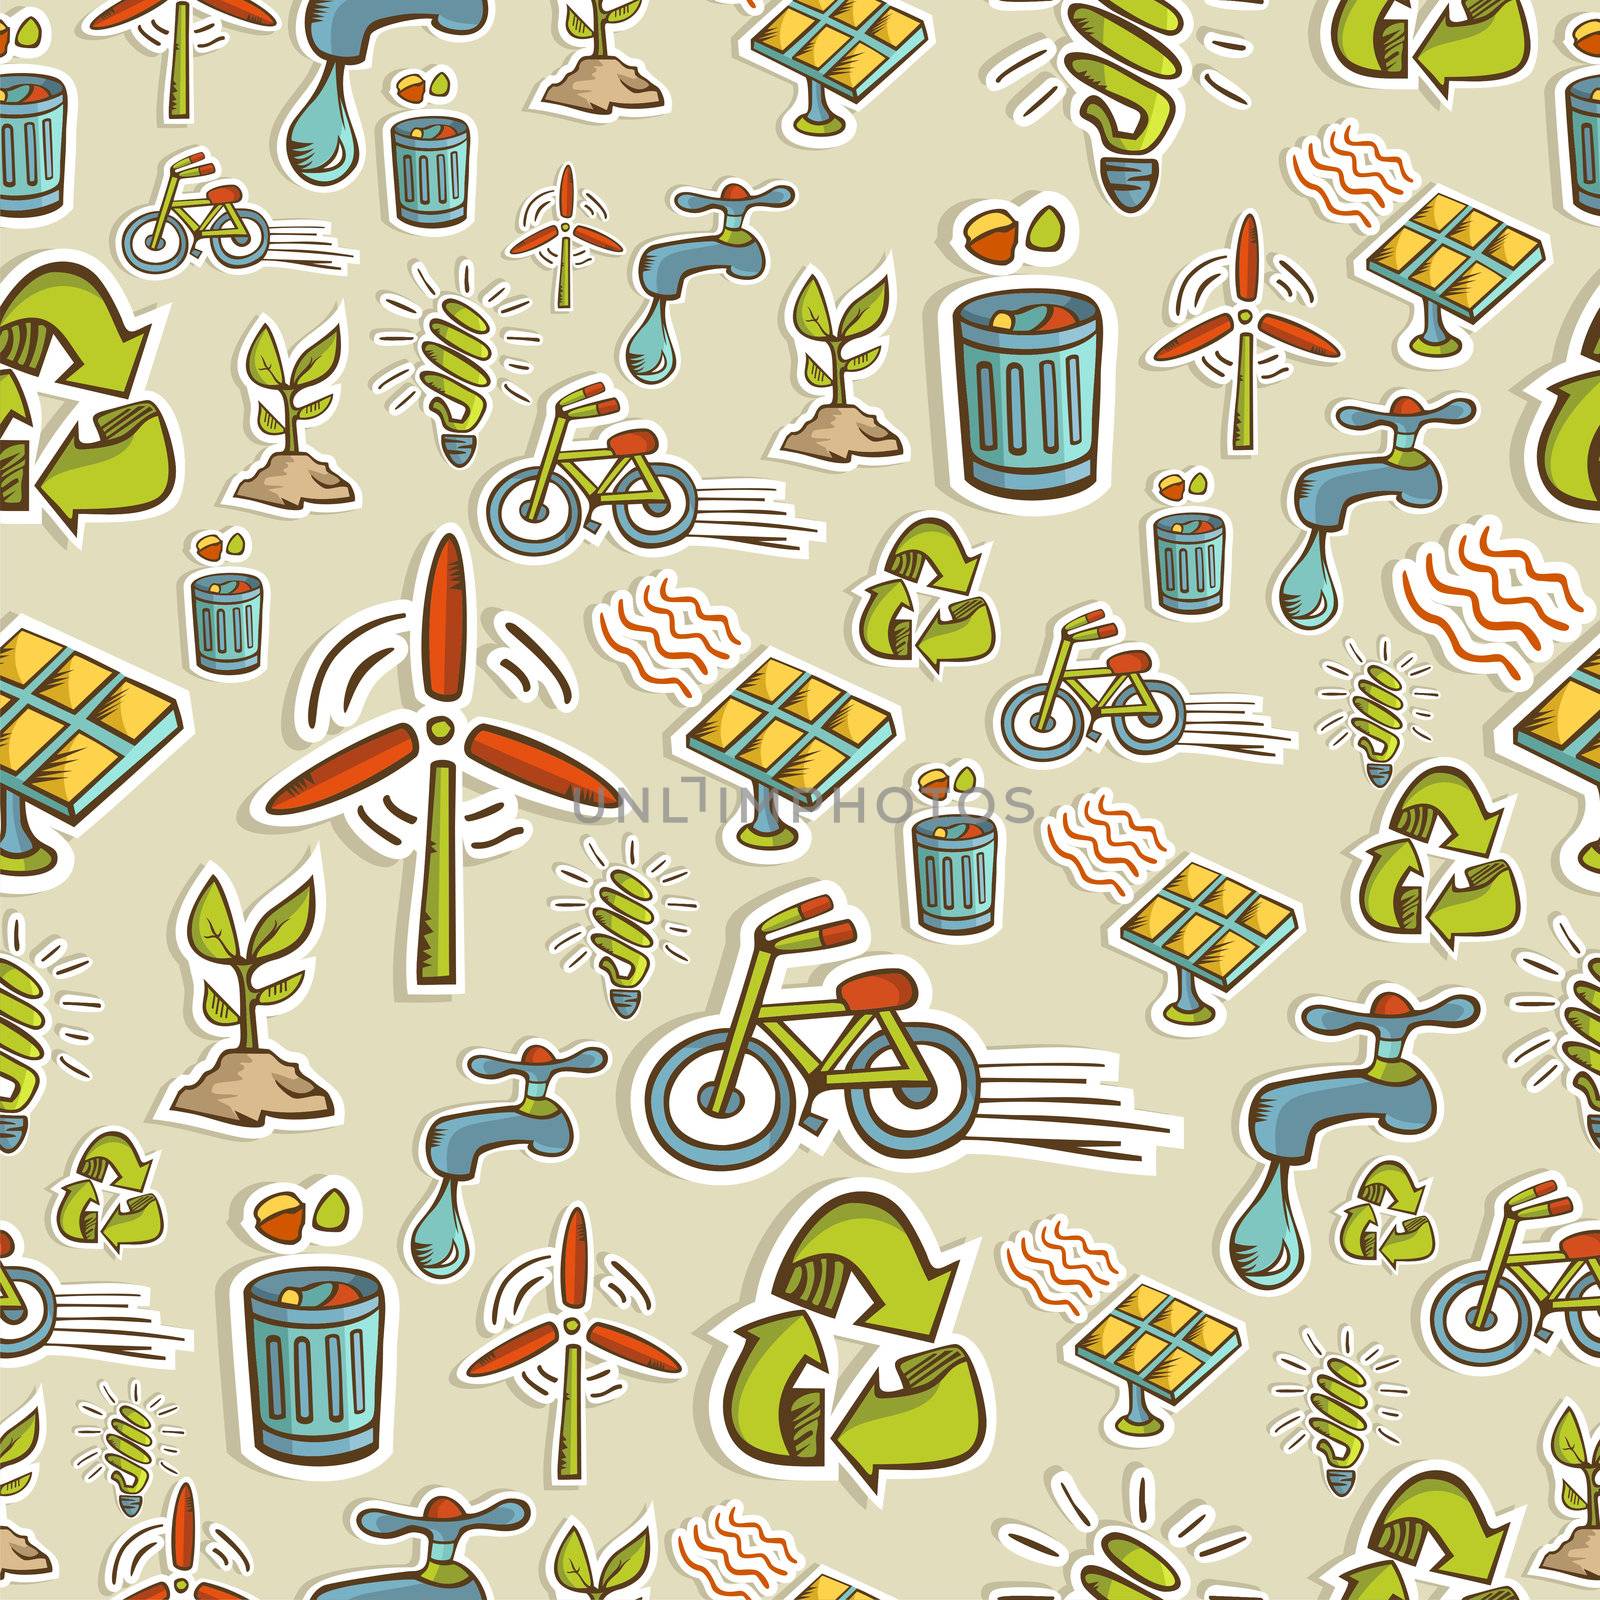 Ecology icon set seamless pattern. Vector file layered for easy manipulation and custom coloring.